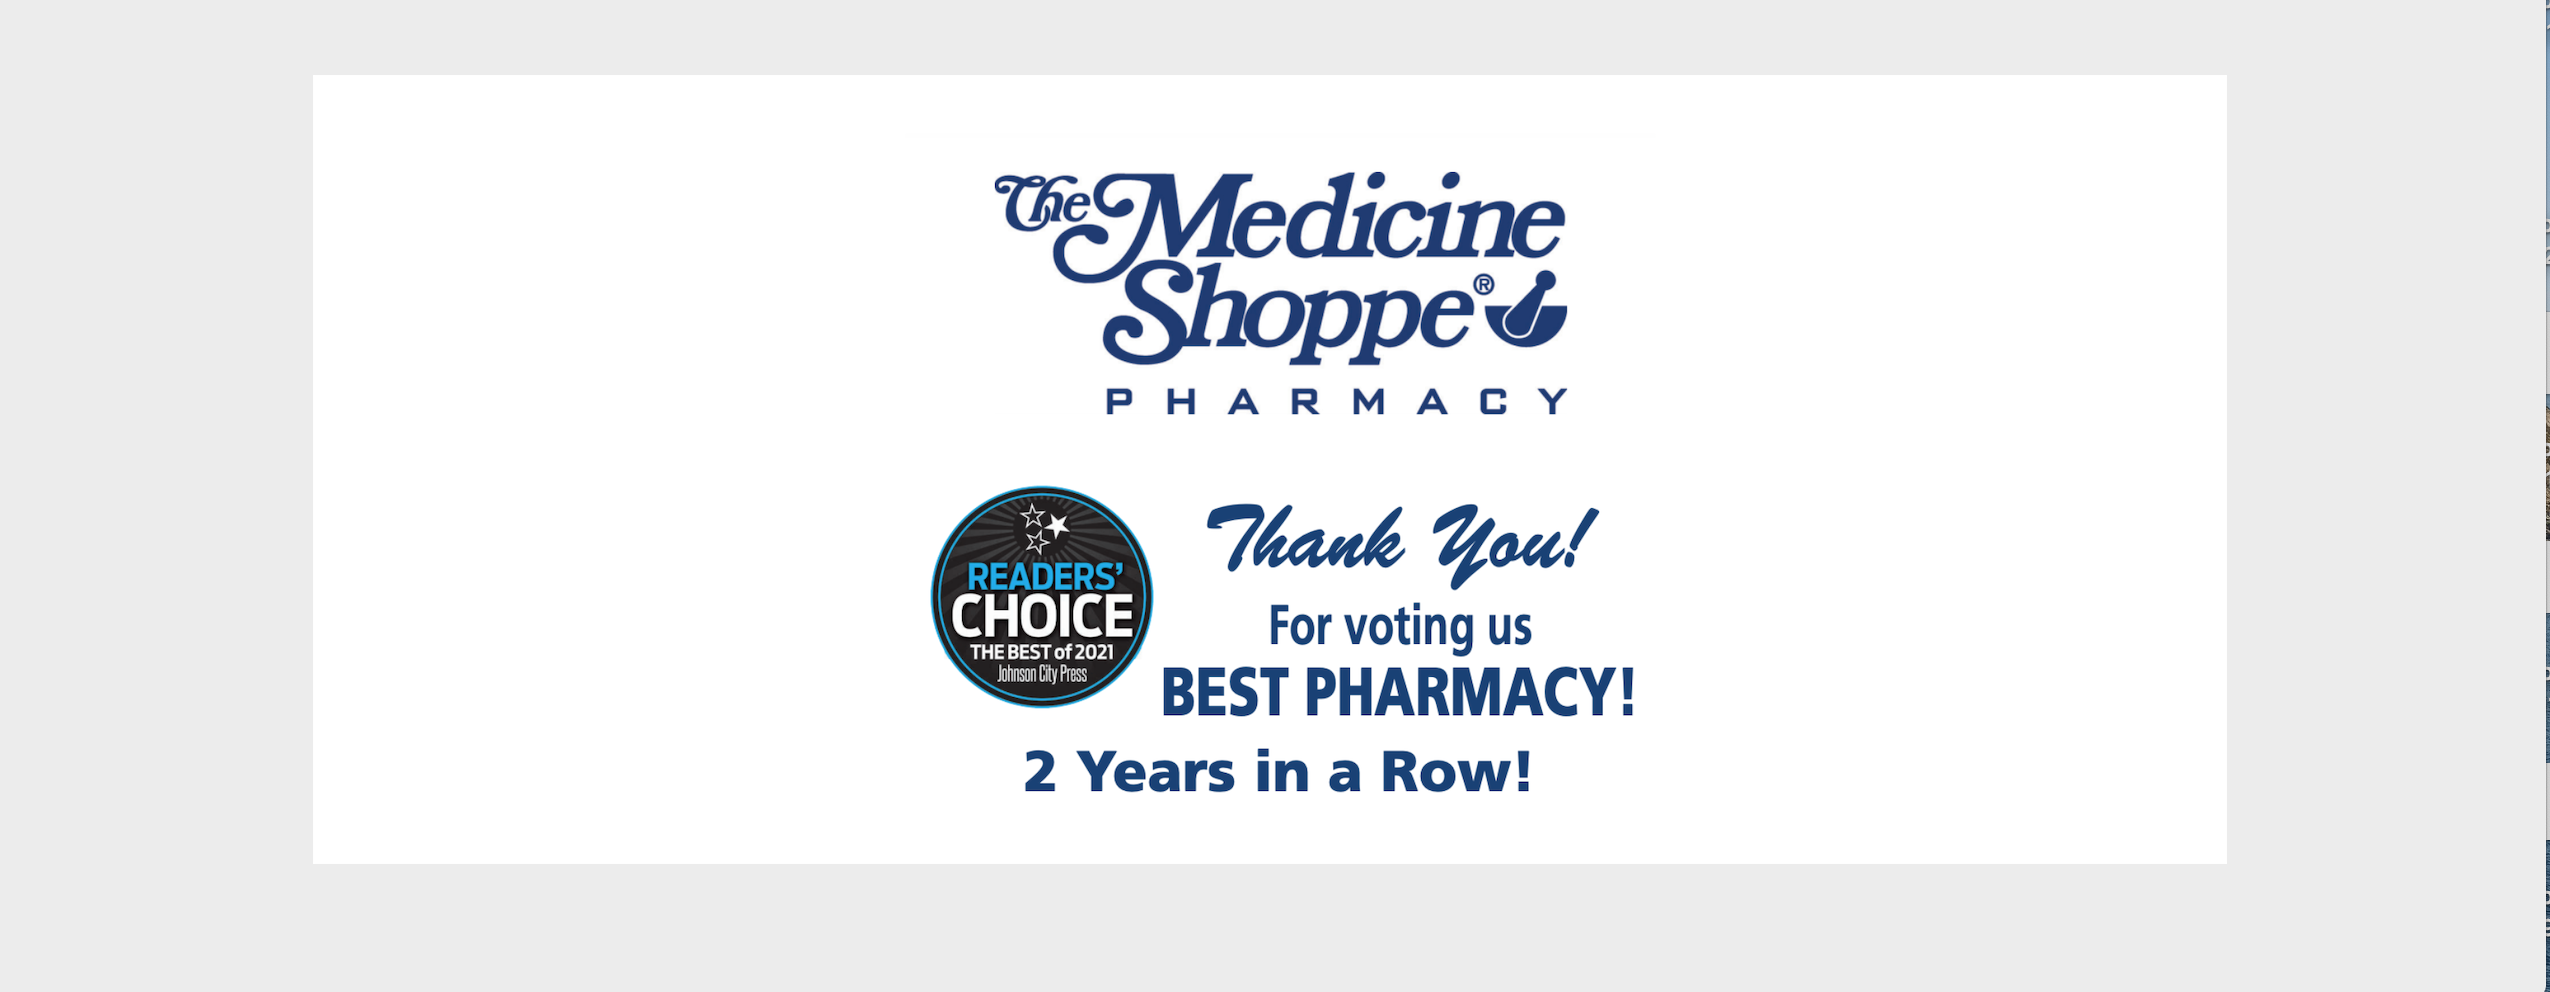 Welcome to The Medicine Shoppe® Pharmacy